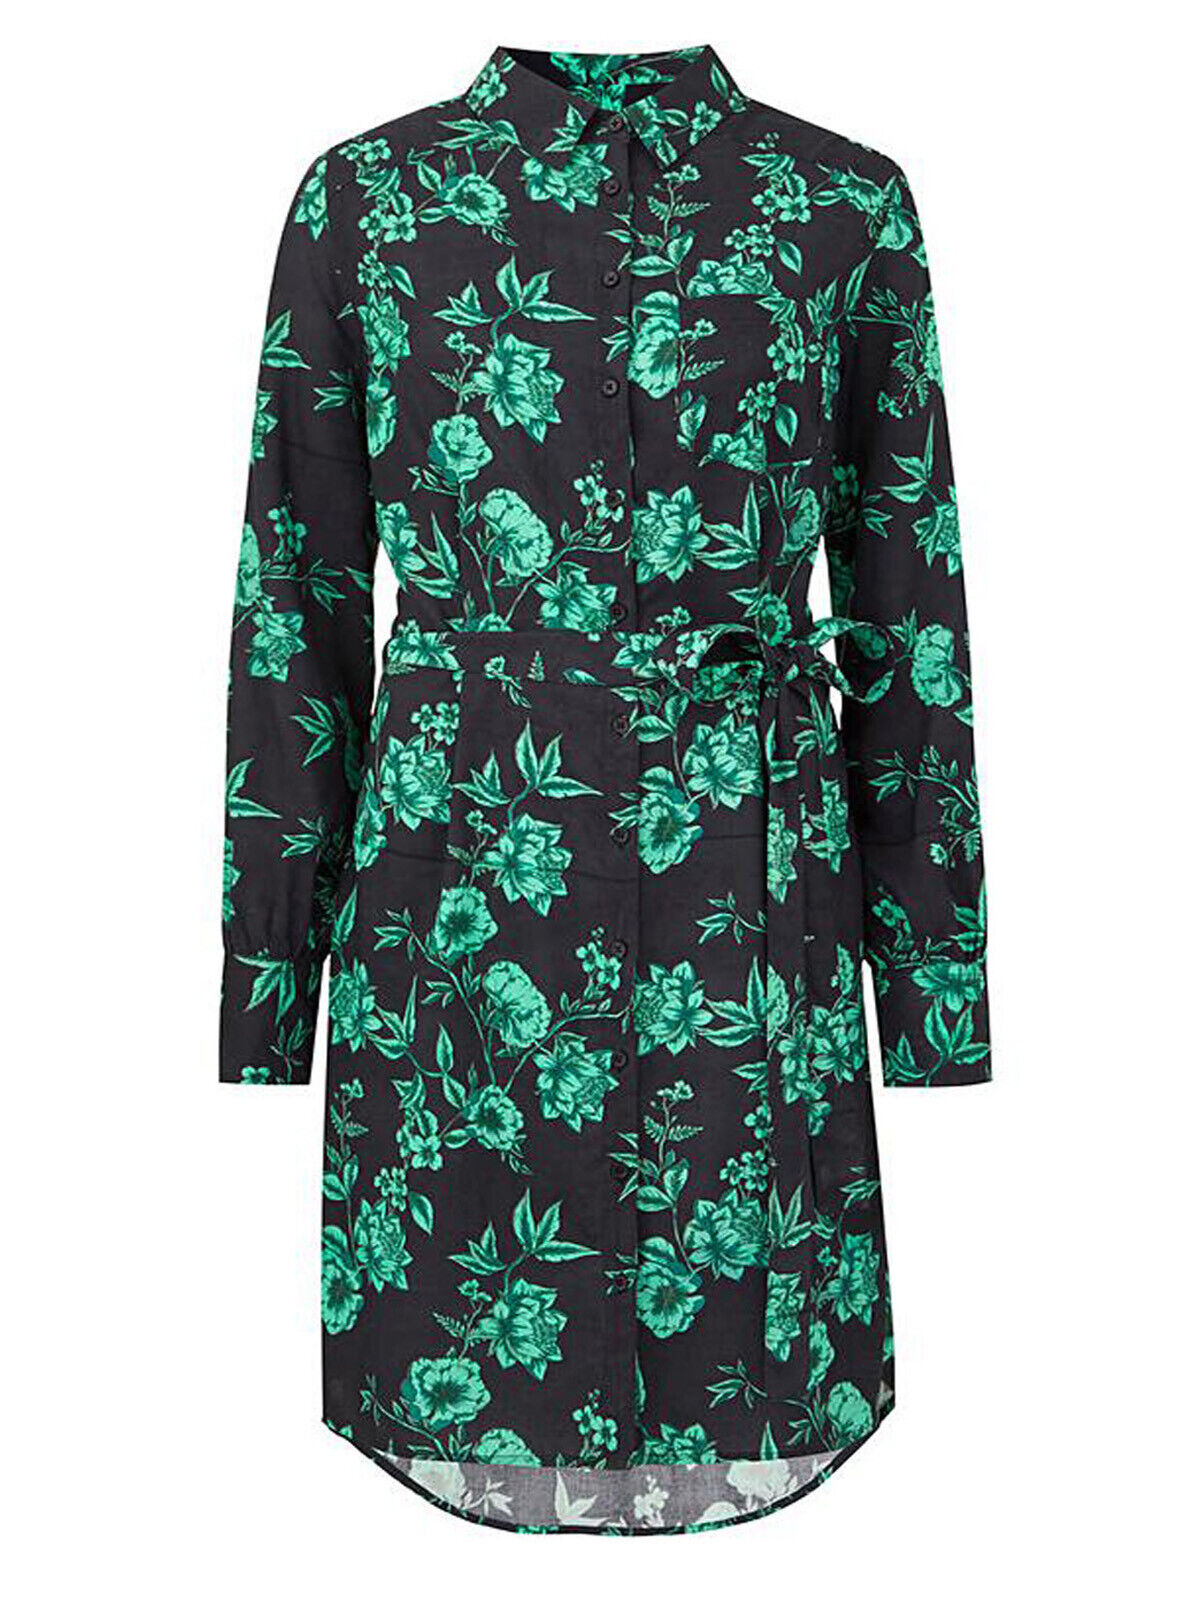 New Capsule Green Floral Print Shirt Dress in Size 16 NO TIE BELT